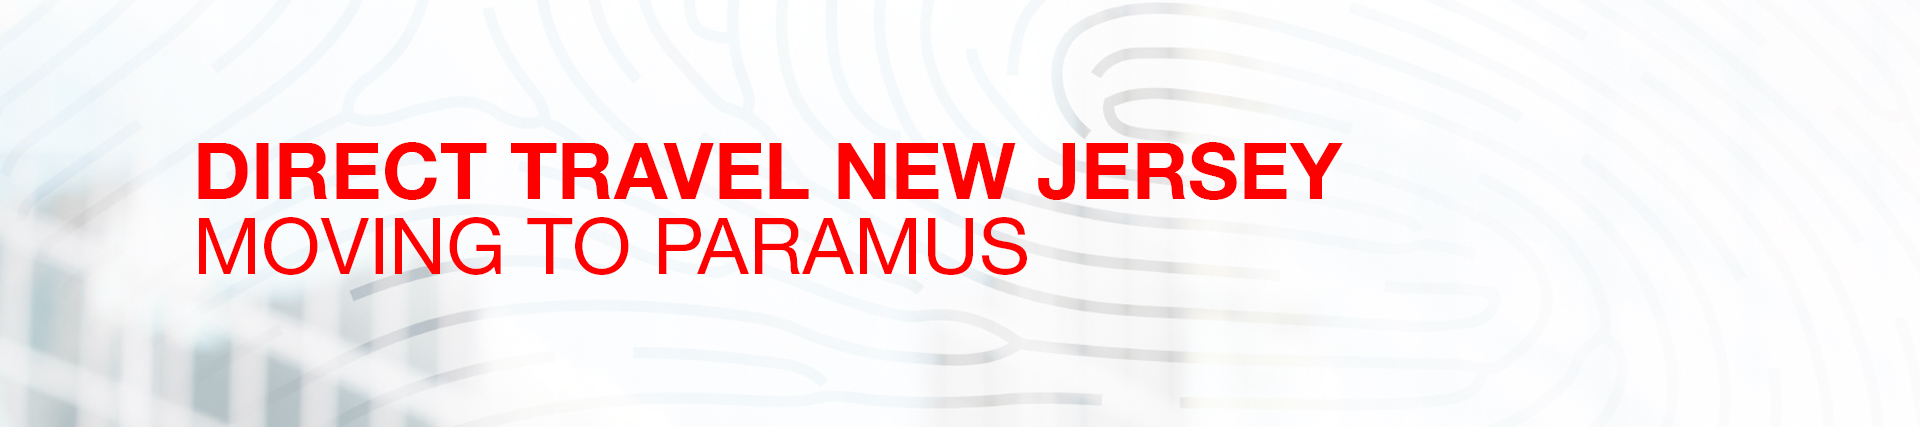 Direct Travel New Jersey Moving to Paramus